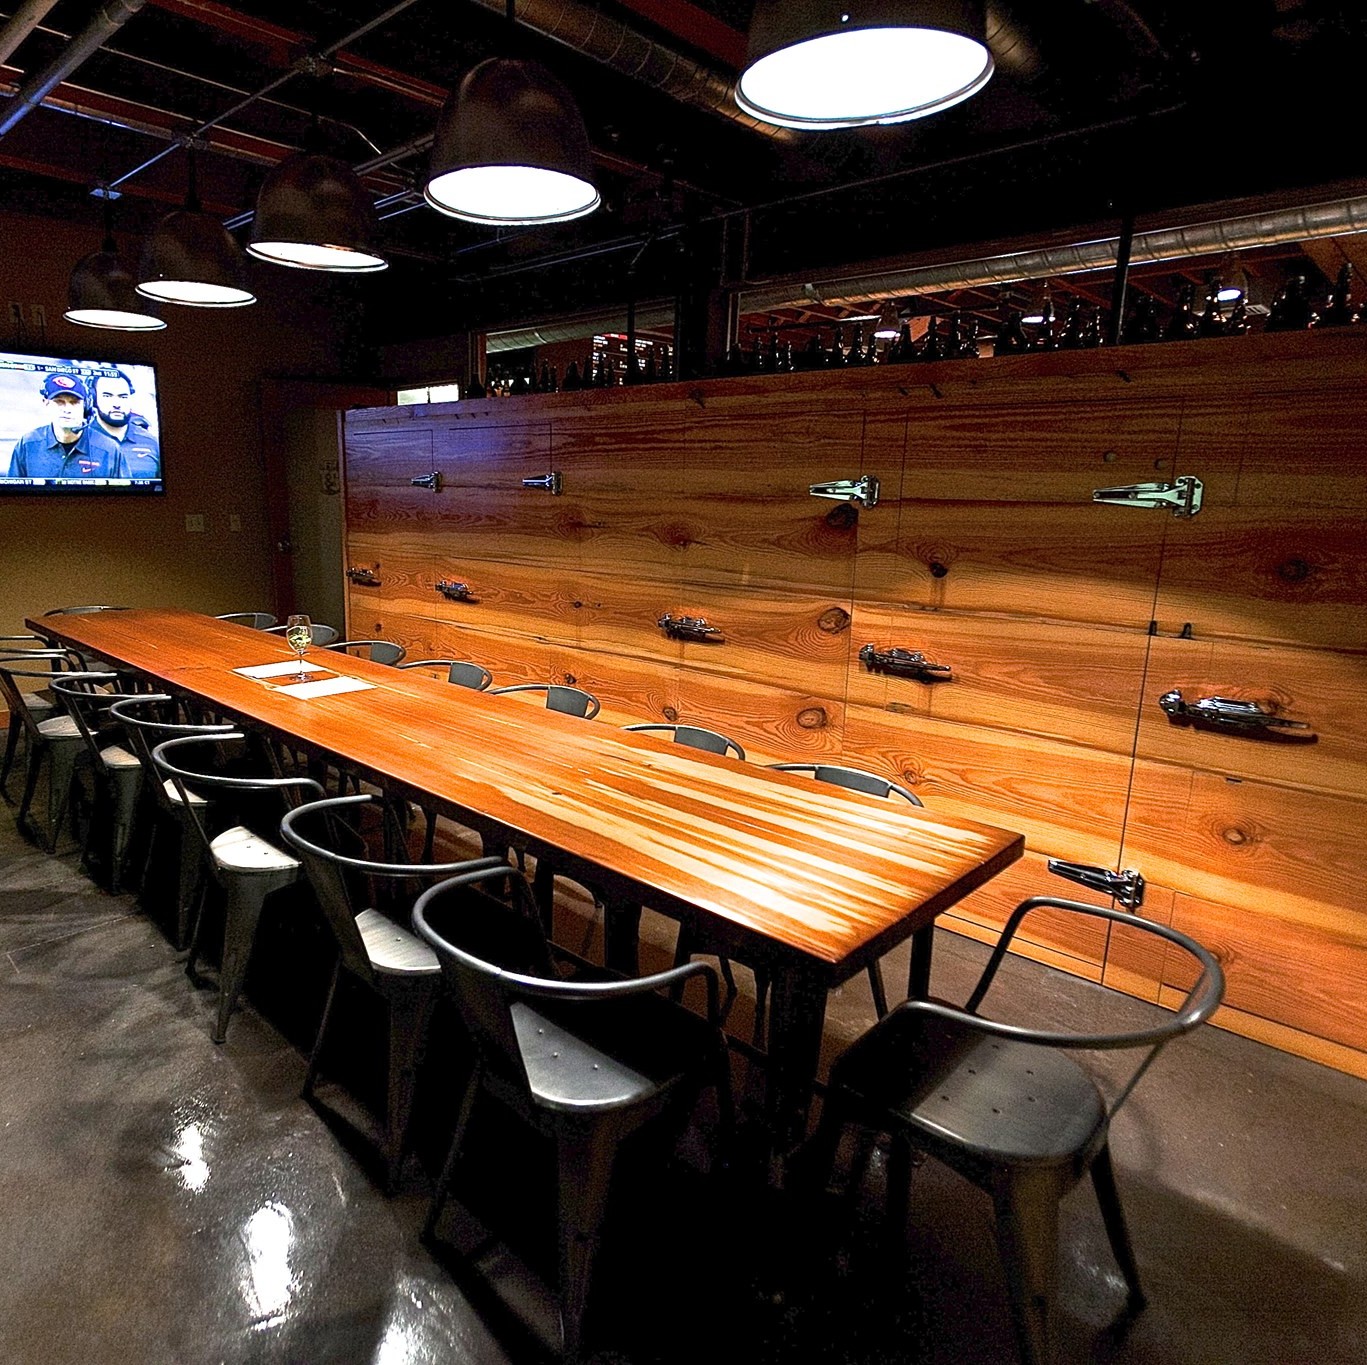 The Barrel Room at the Tap and Growler is used for special events